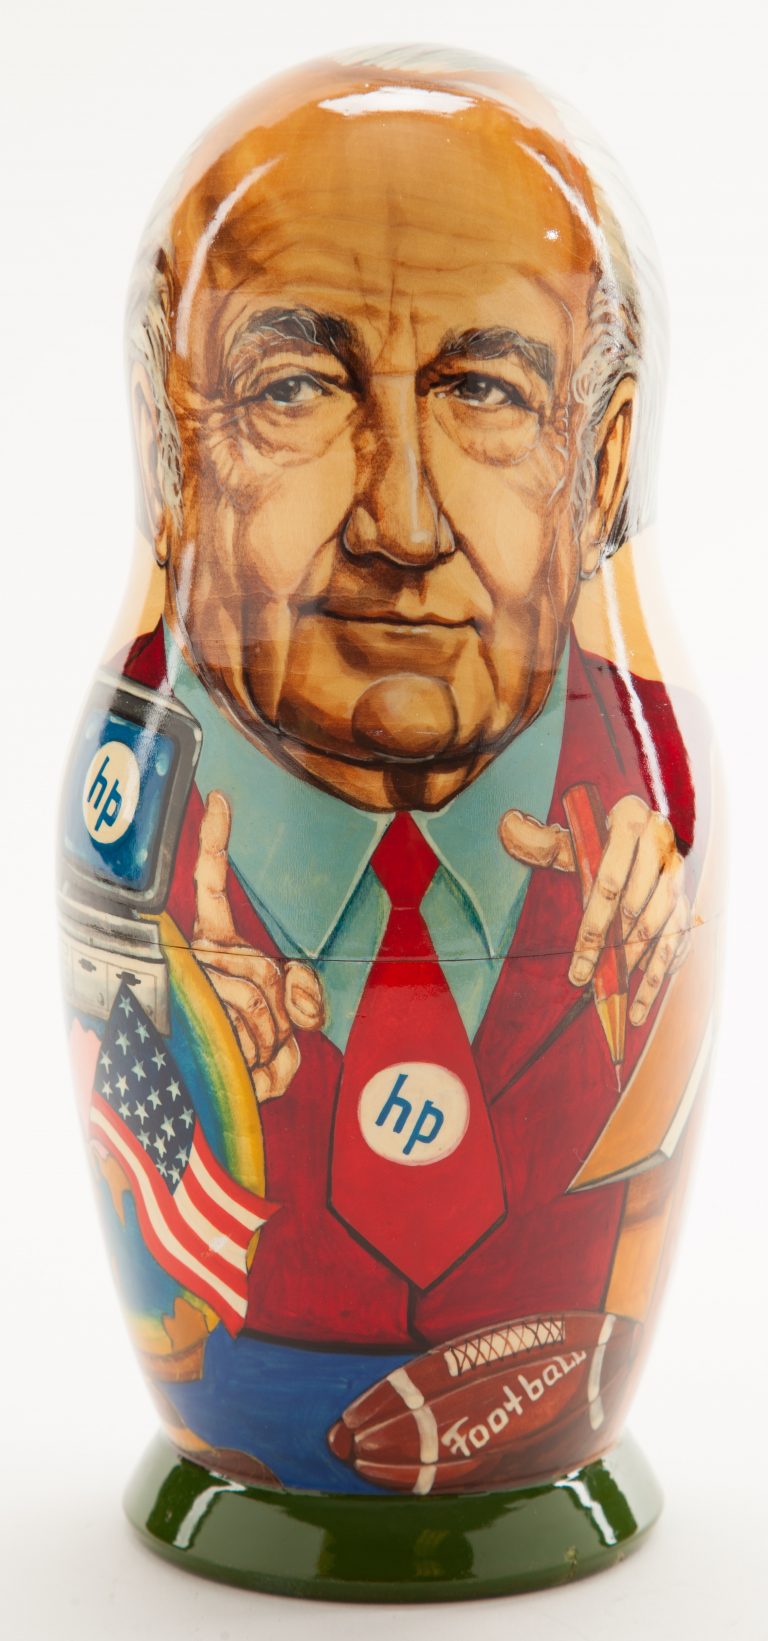 Matryoshka doll depicting Dave Packard on one side and Bill Hewlett on the other, showing Dave's side.